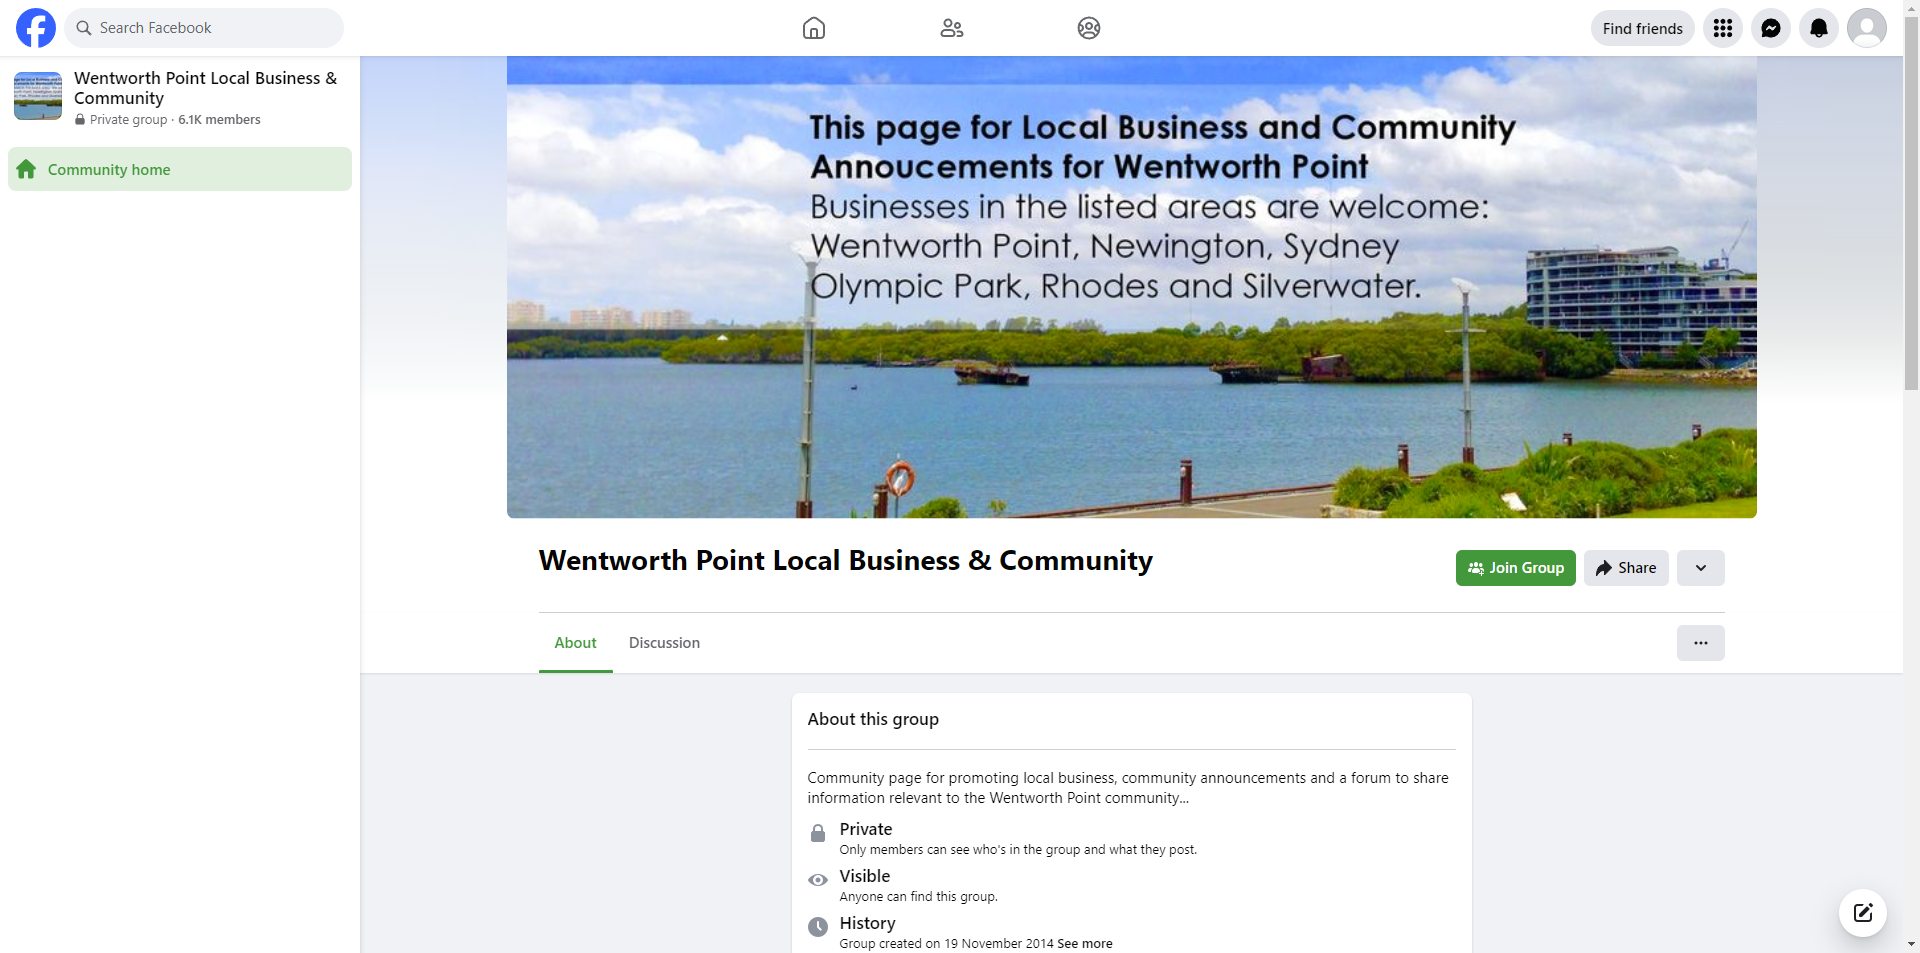 Wentworth Point Local Business & Community